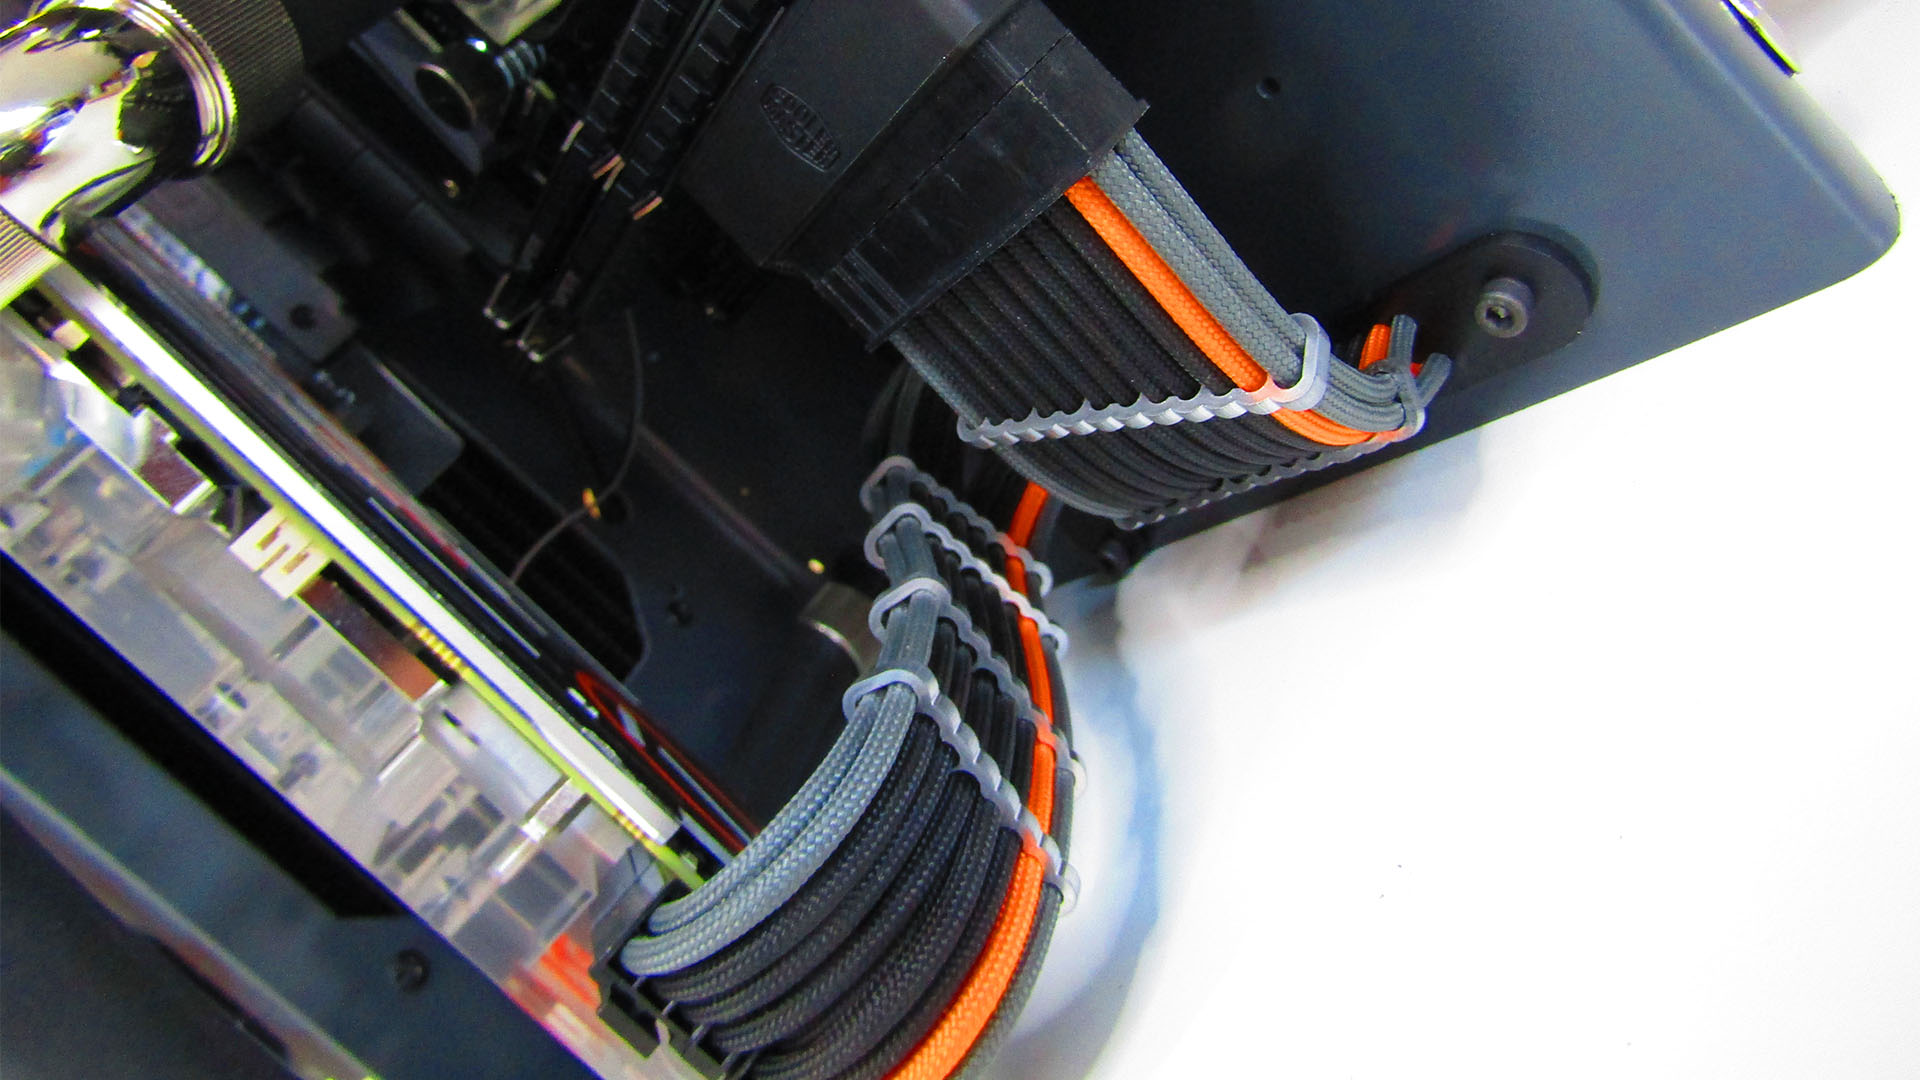 The cabling in the mini-itx gaming pc